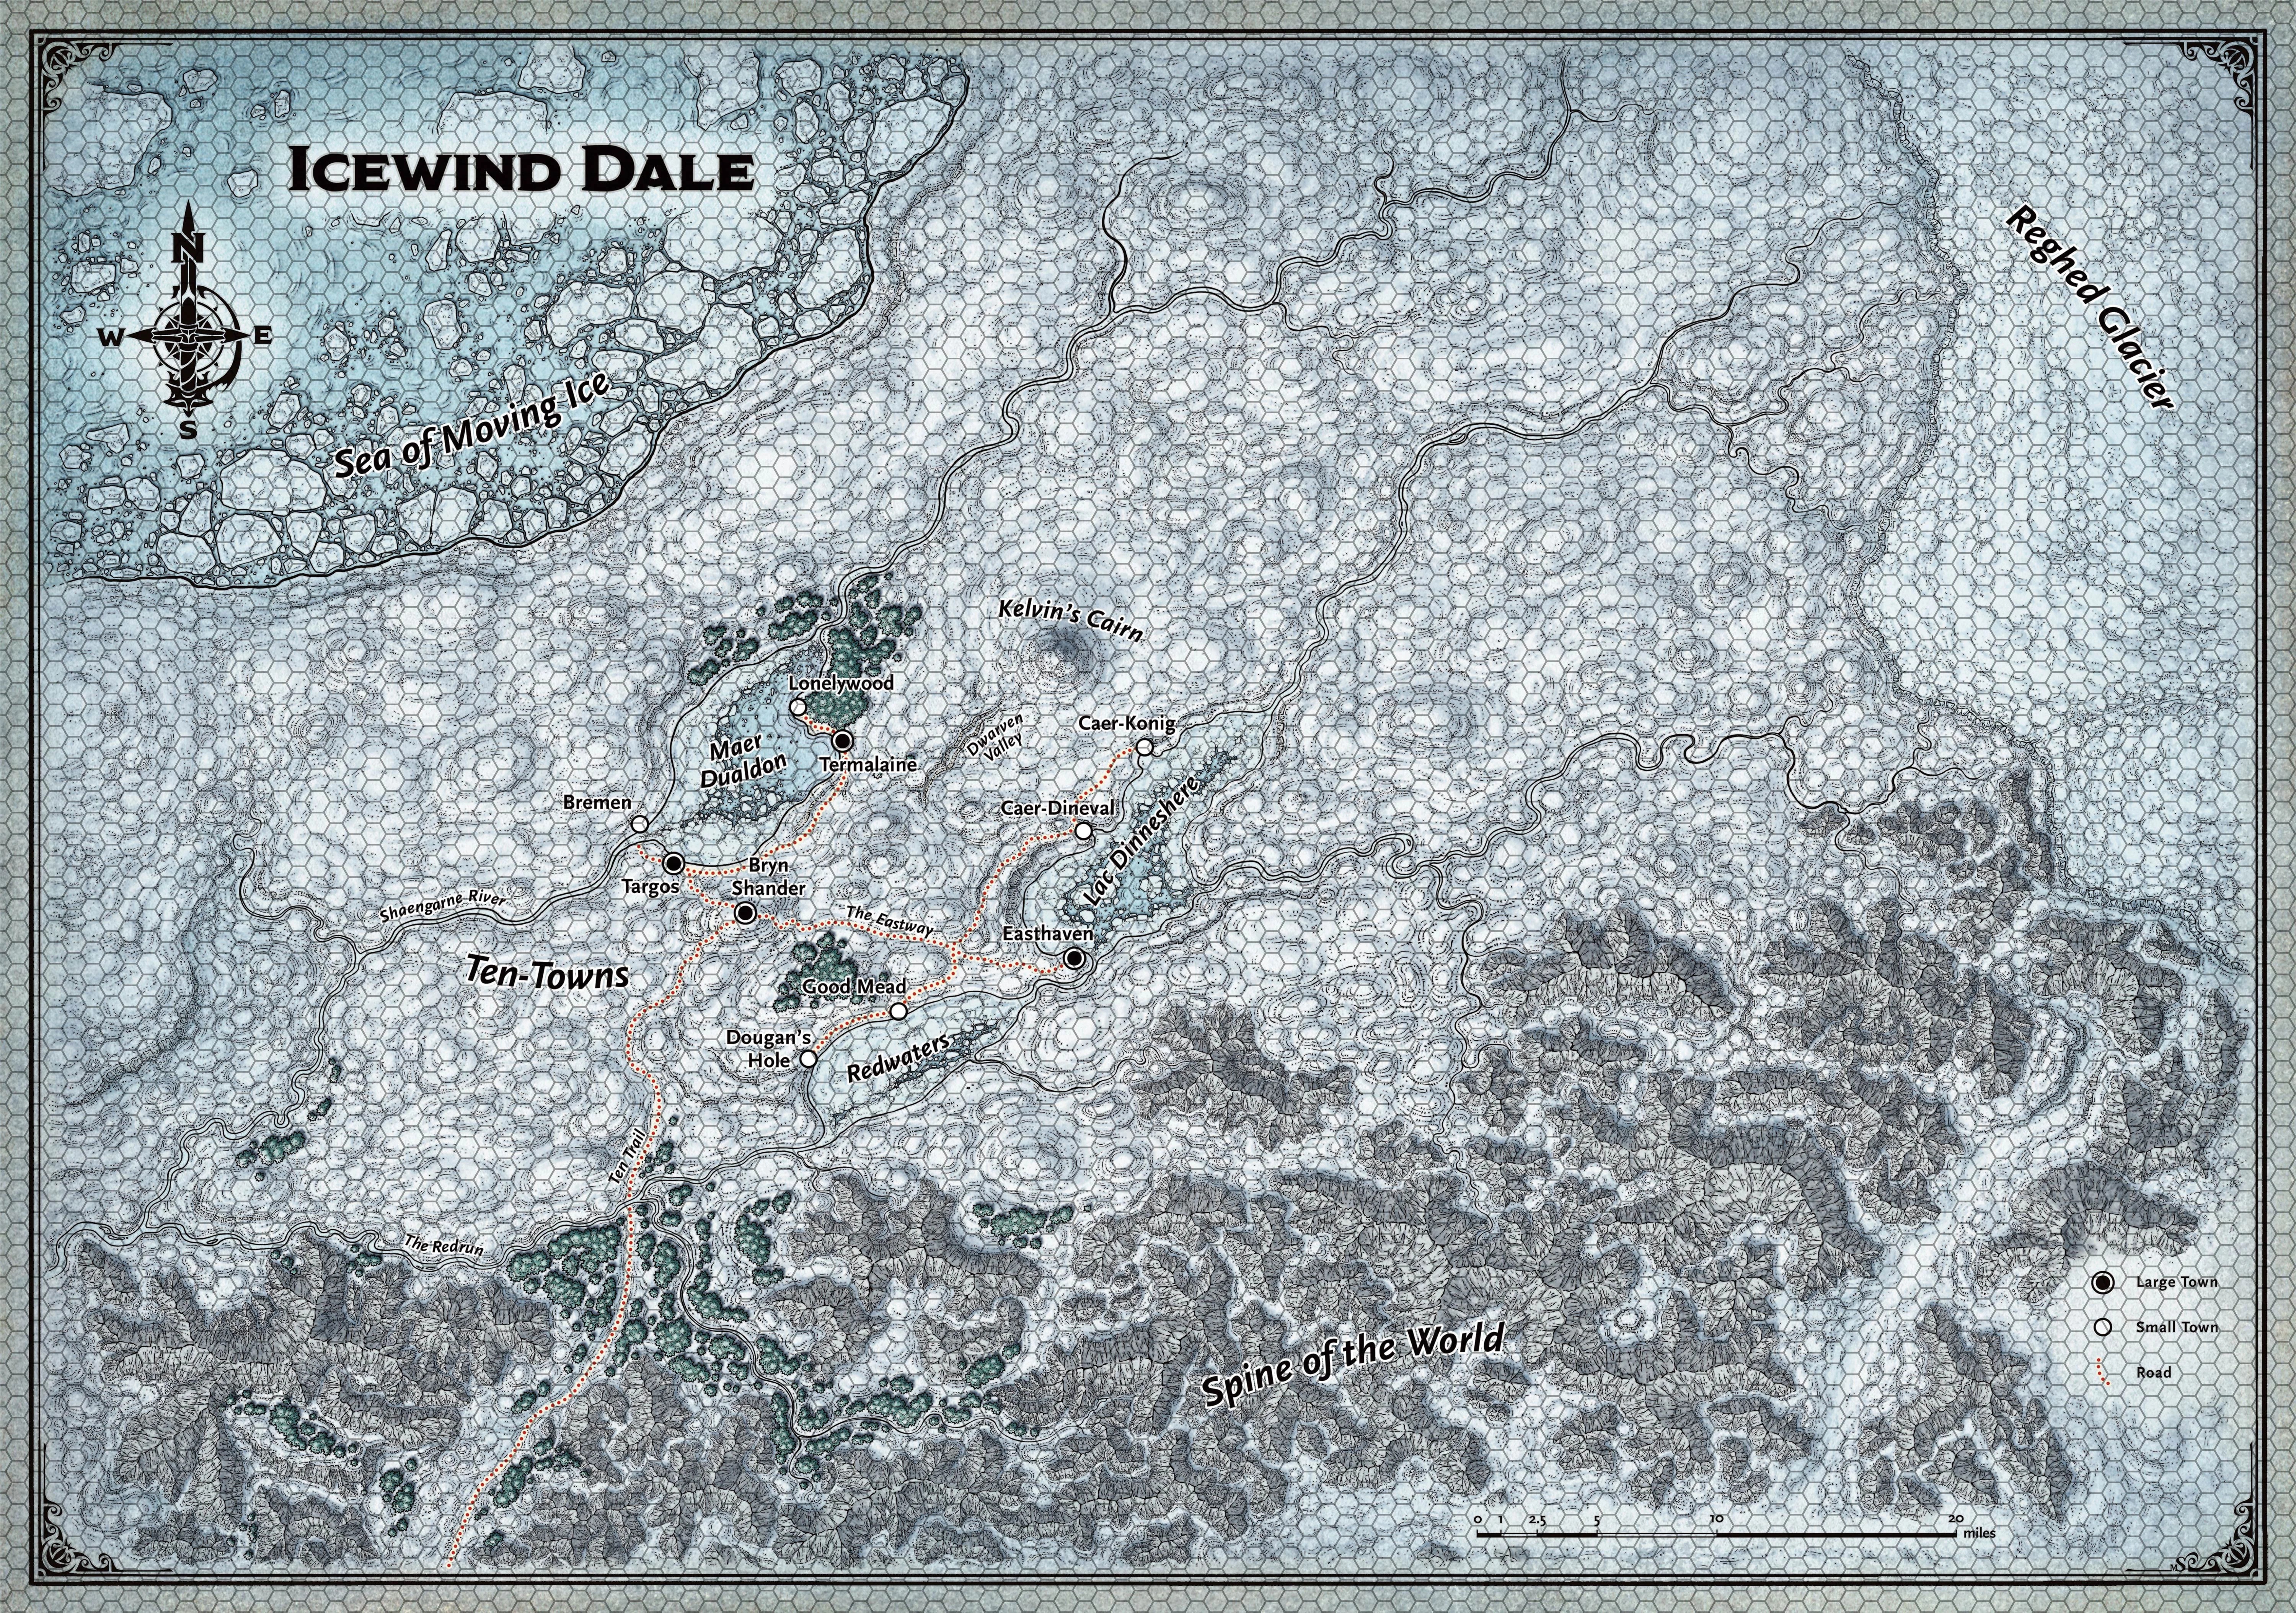 map_icewind dale_player_hex.jpg